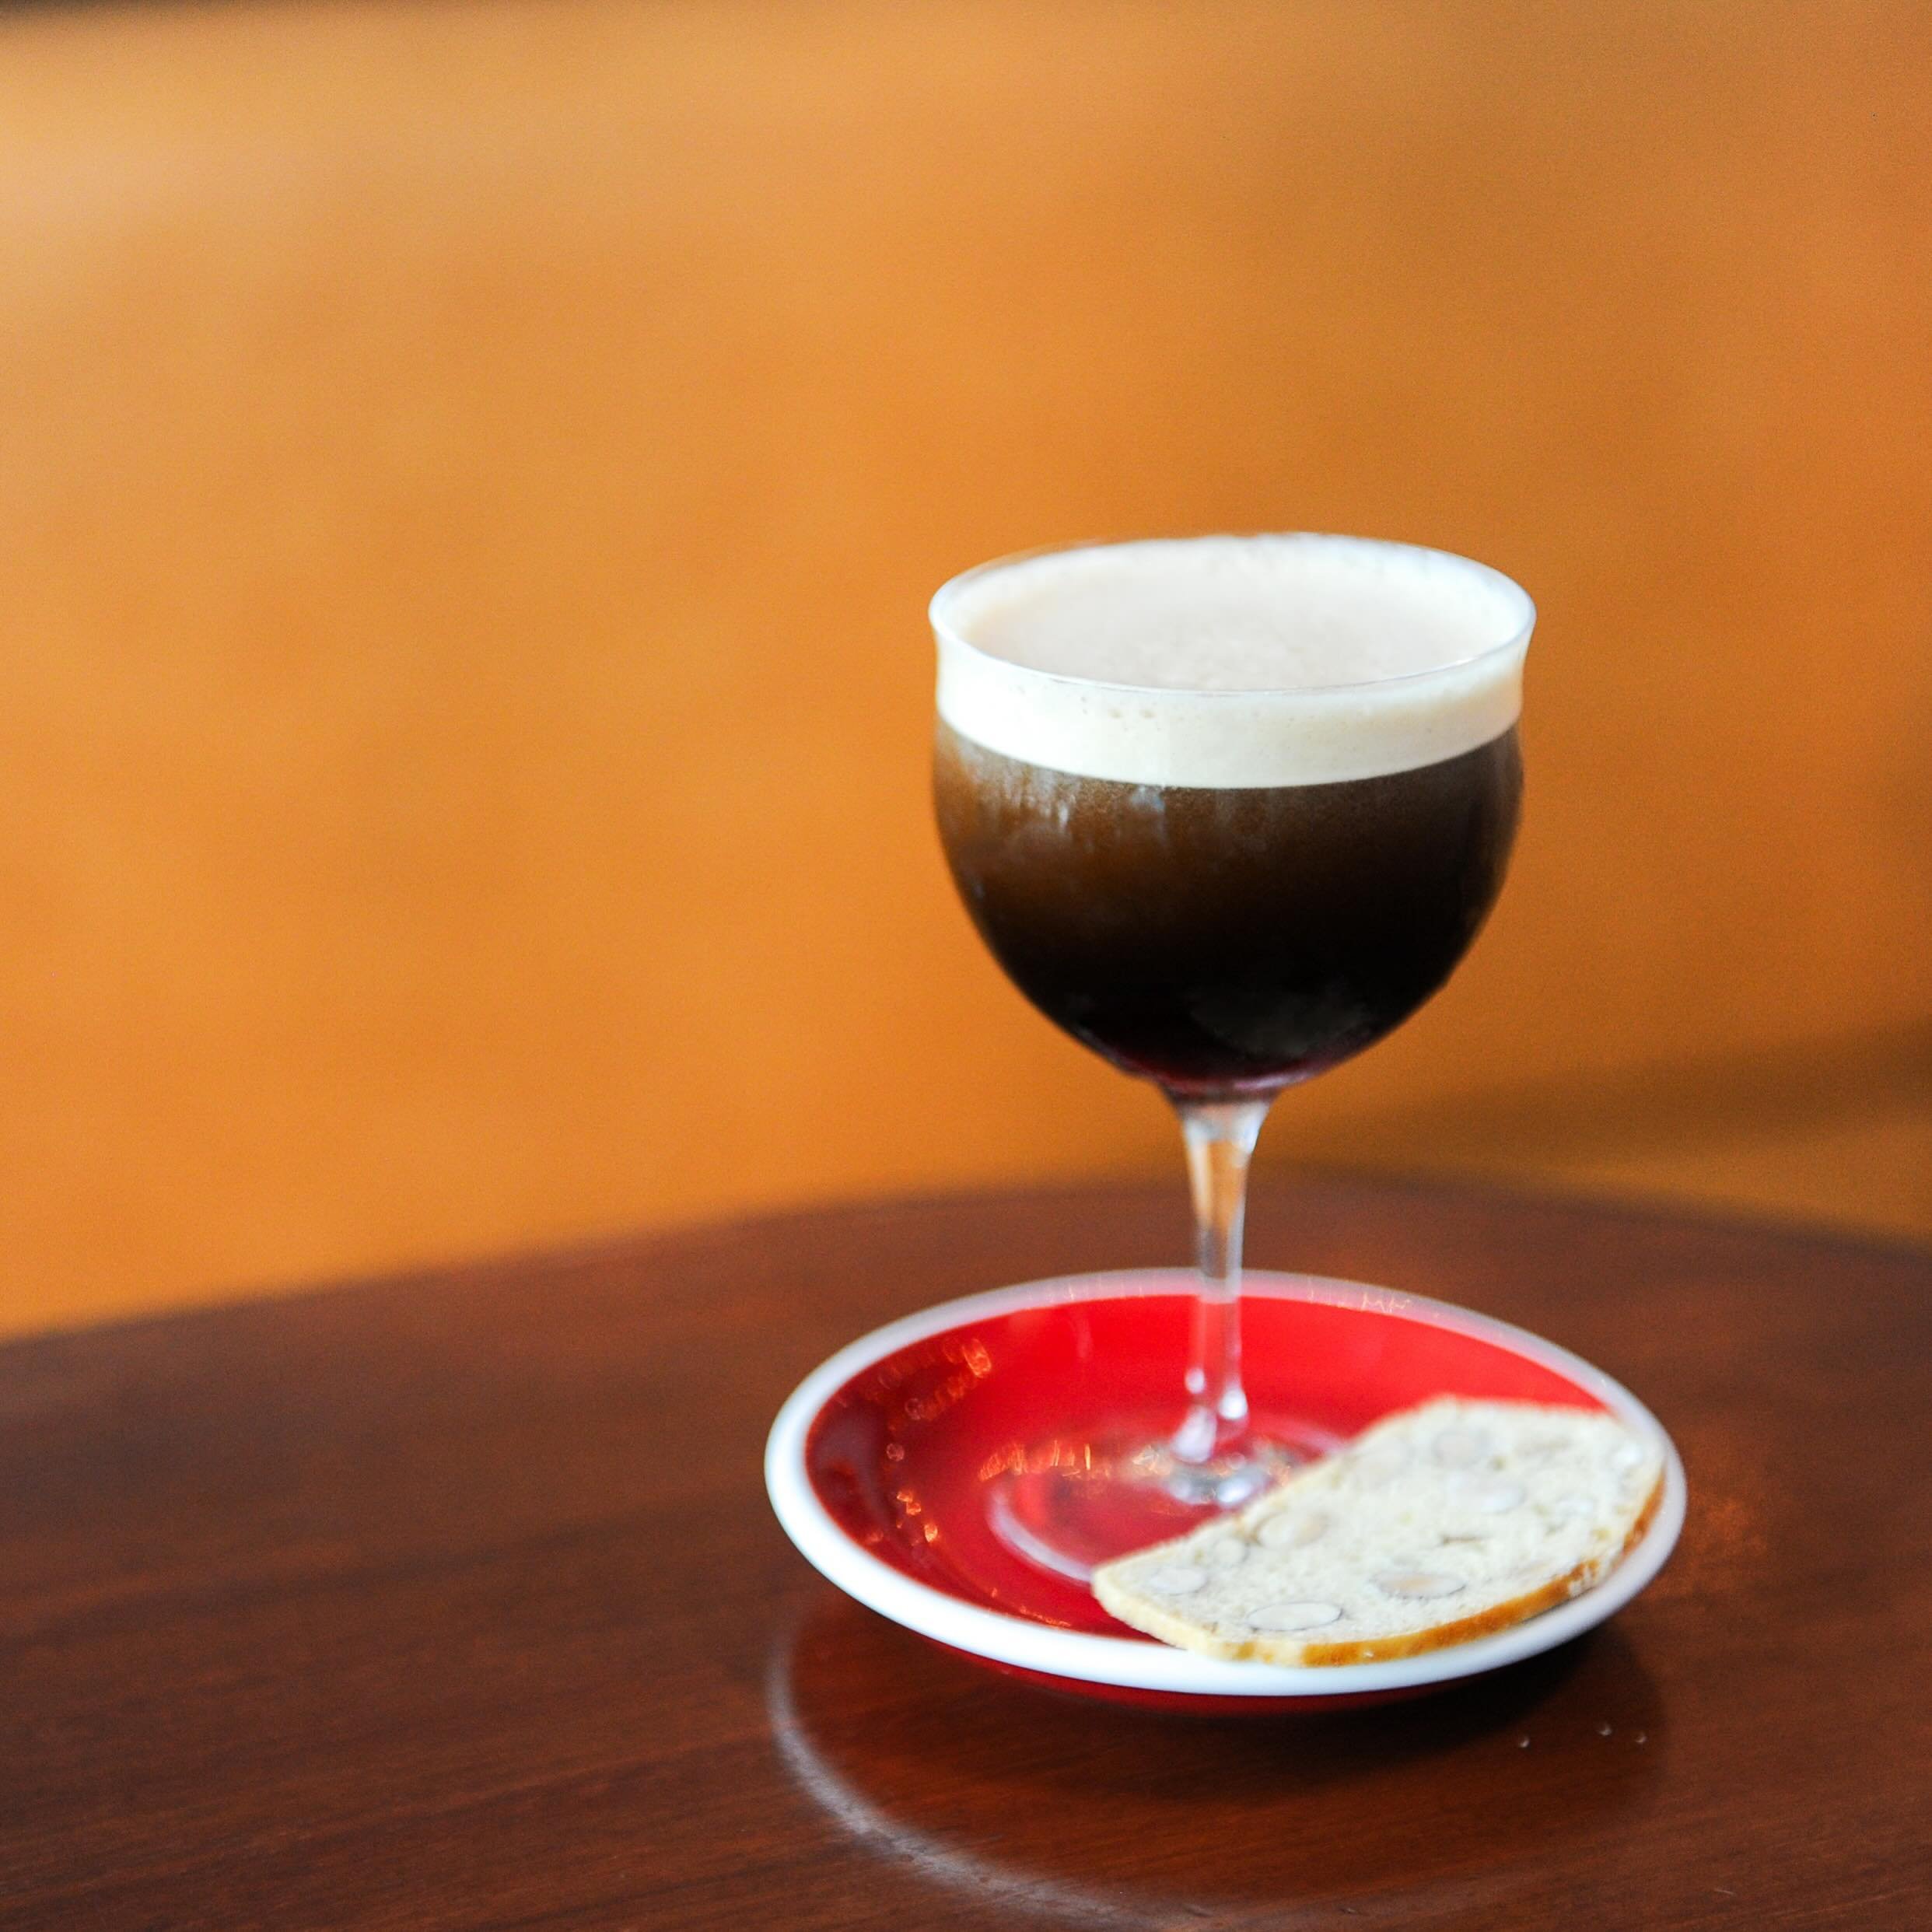 Introducing Caffe Fernet&rsquo;s first-ever draft cocktail - the Nitro Espresso Martini! 

Starring Jameson Caskmates Stout Edition Irish Whiskey, expect delectable notes of cocoa, coffee and butterscotch. With a touch of Okinawa sugar to enhance the